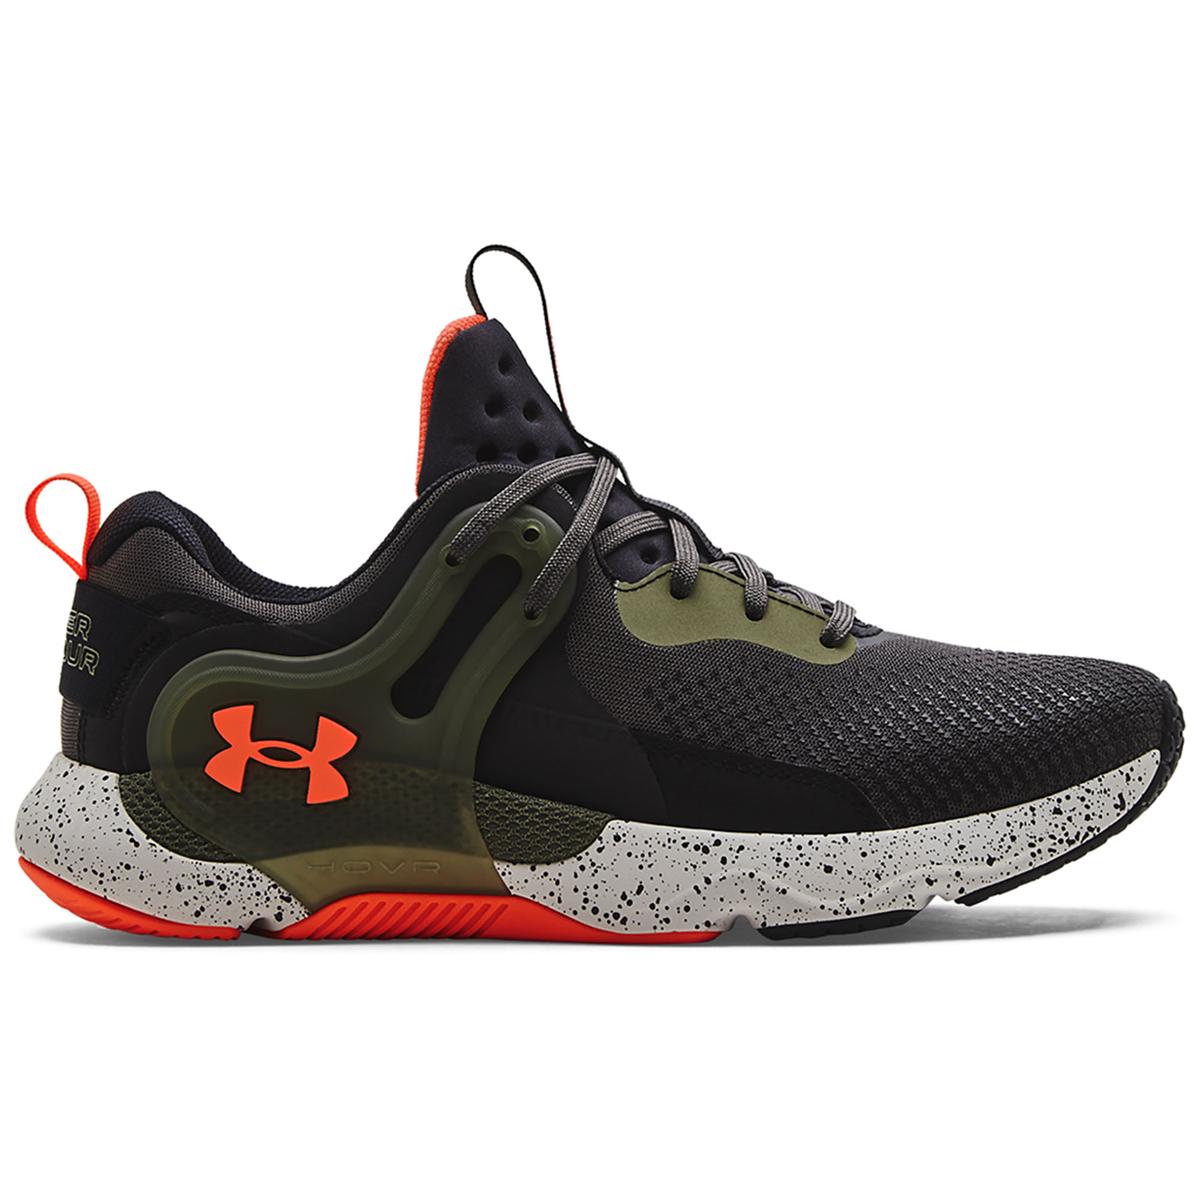 Under Armour Hovr Apex 3 review: Stylish cross-training shoes built for the  gym